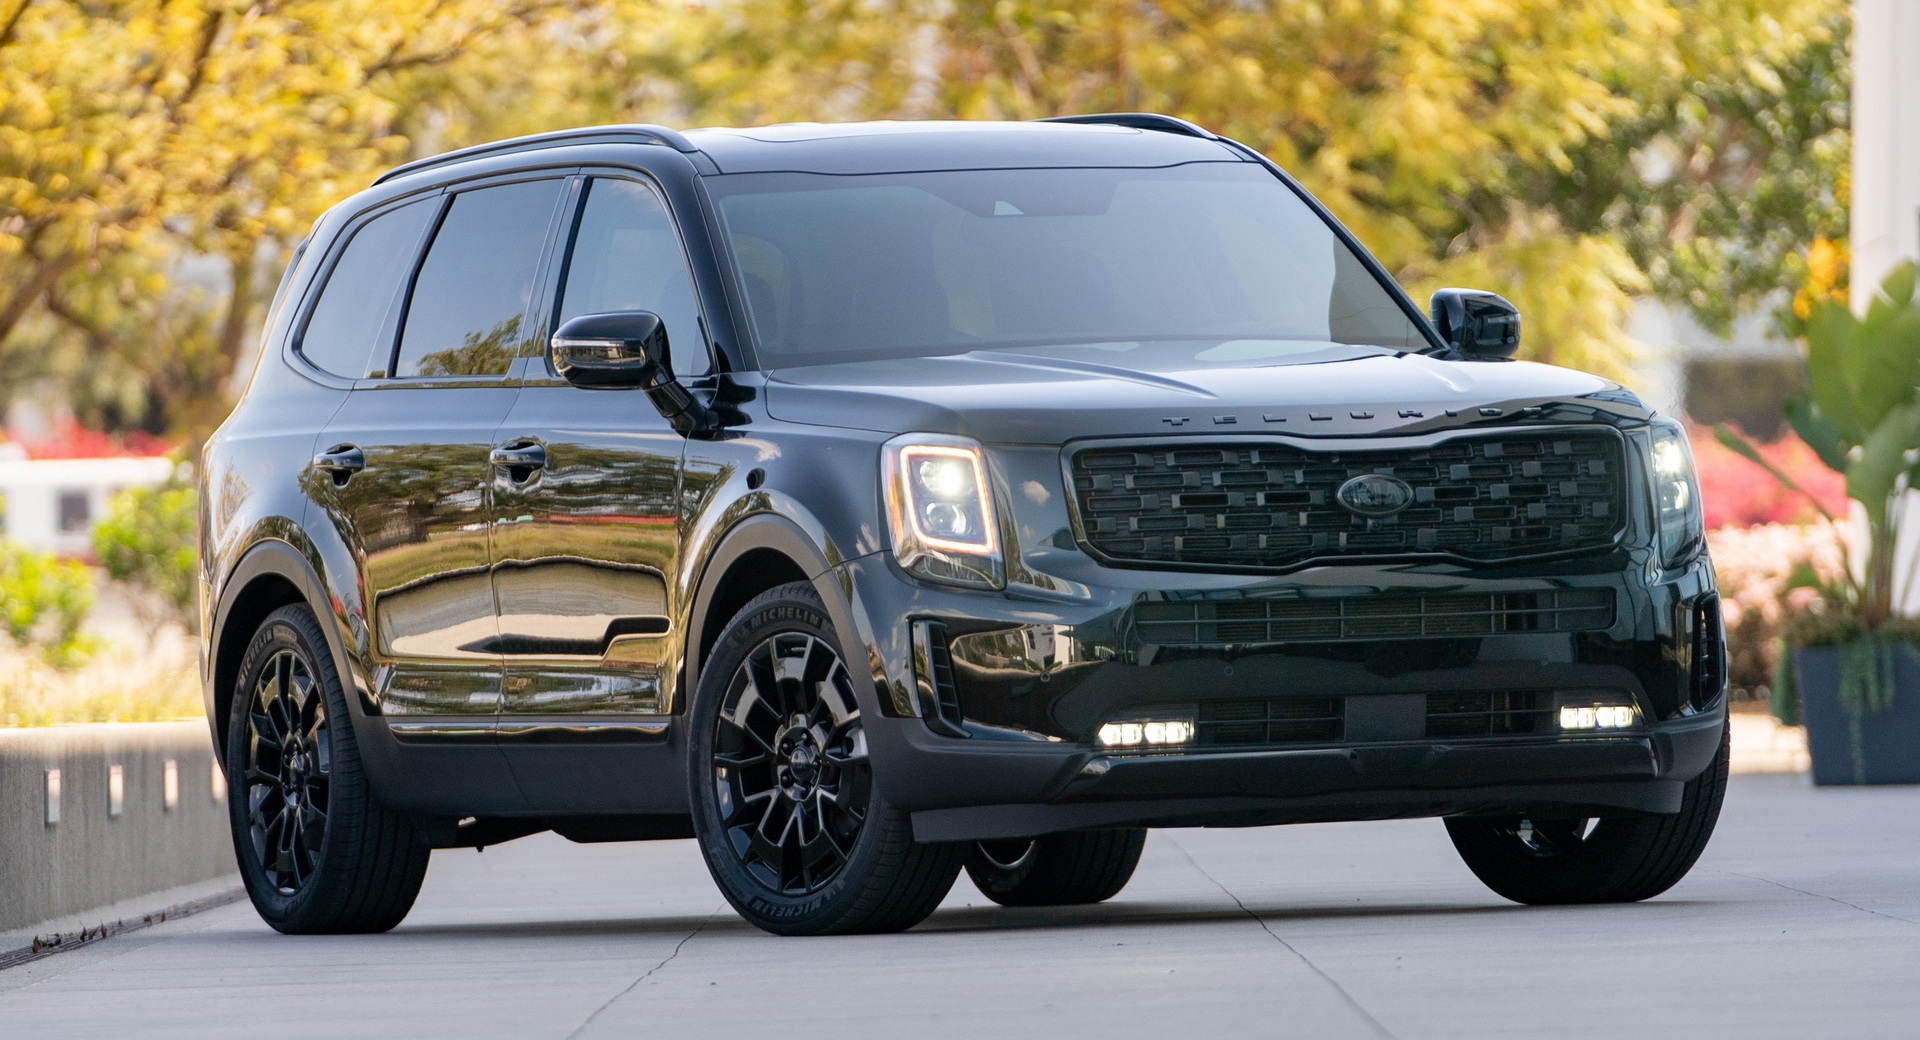 Kia Telluride And Hyundai Palisade Owners Advised To Not Park